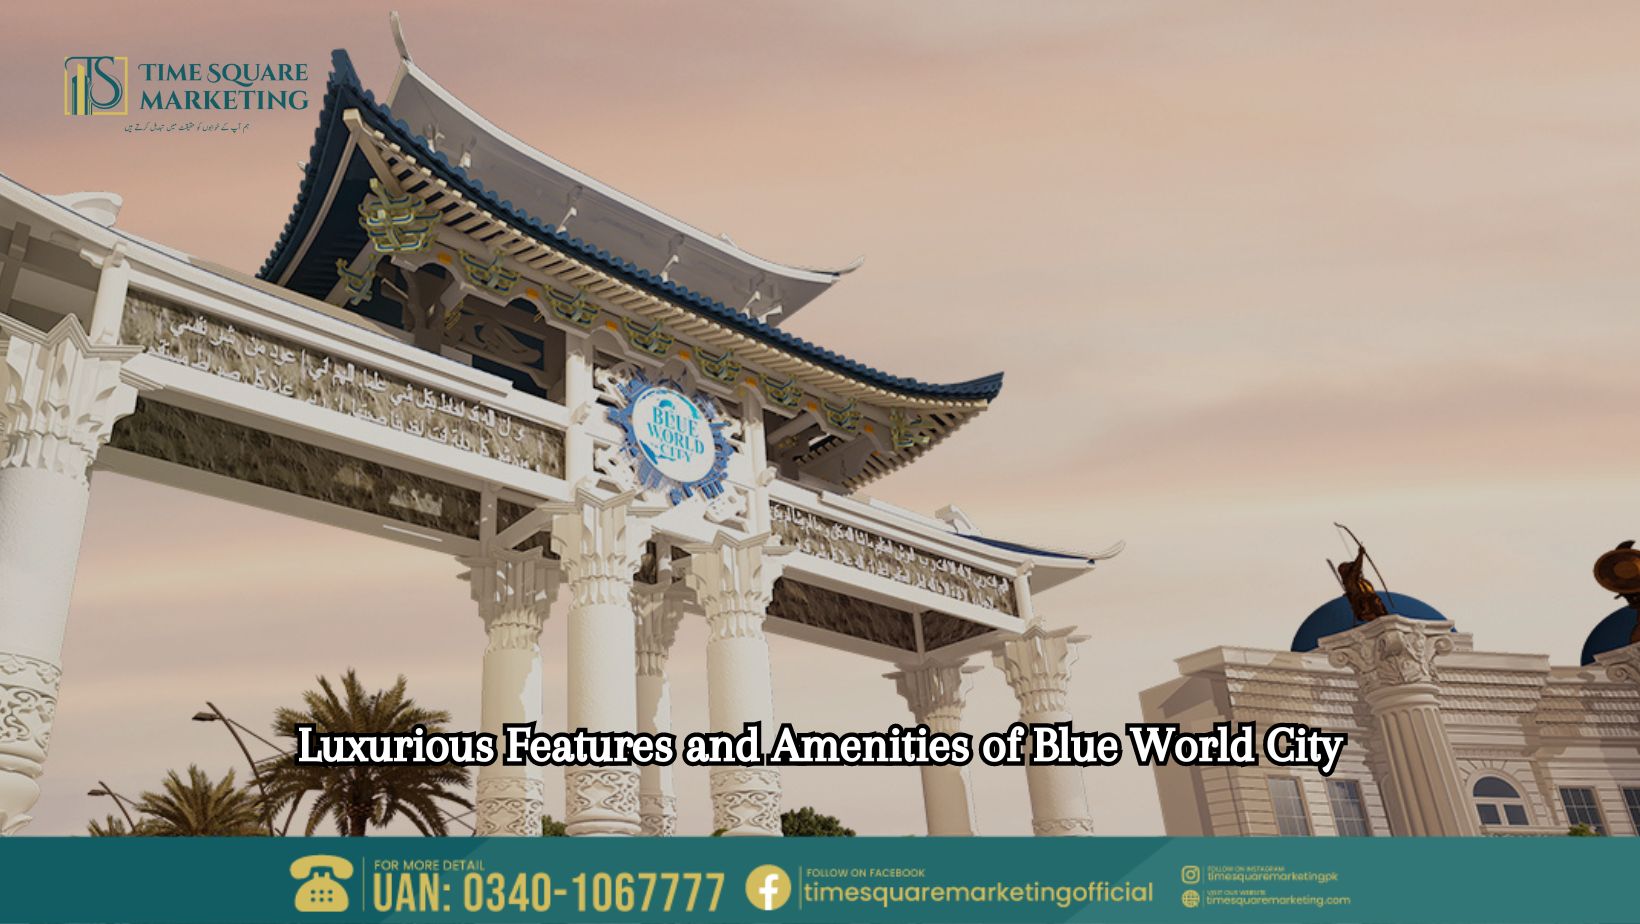 Luxurious Features and Amenities of Blue World City